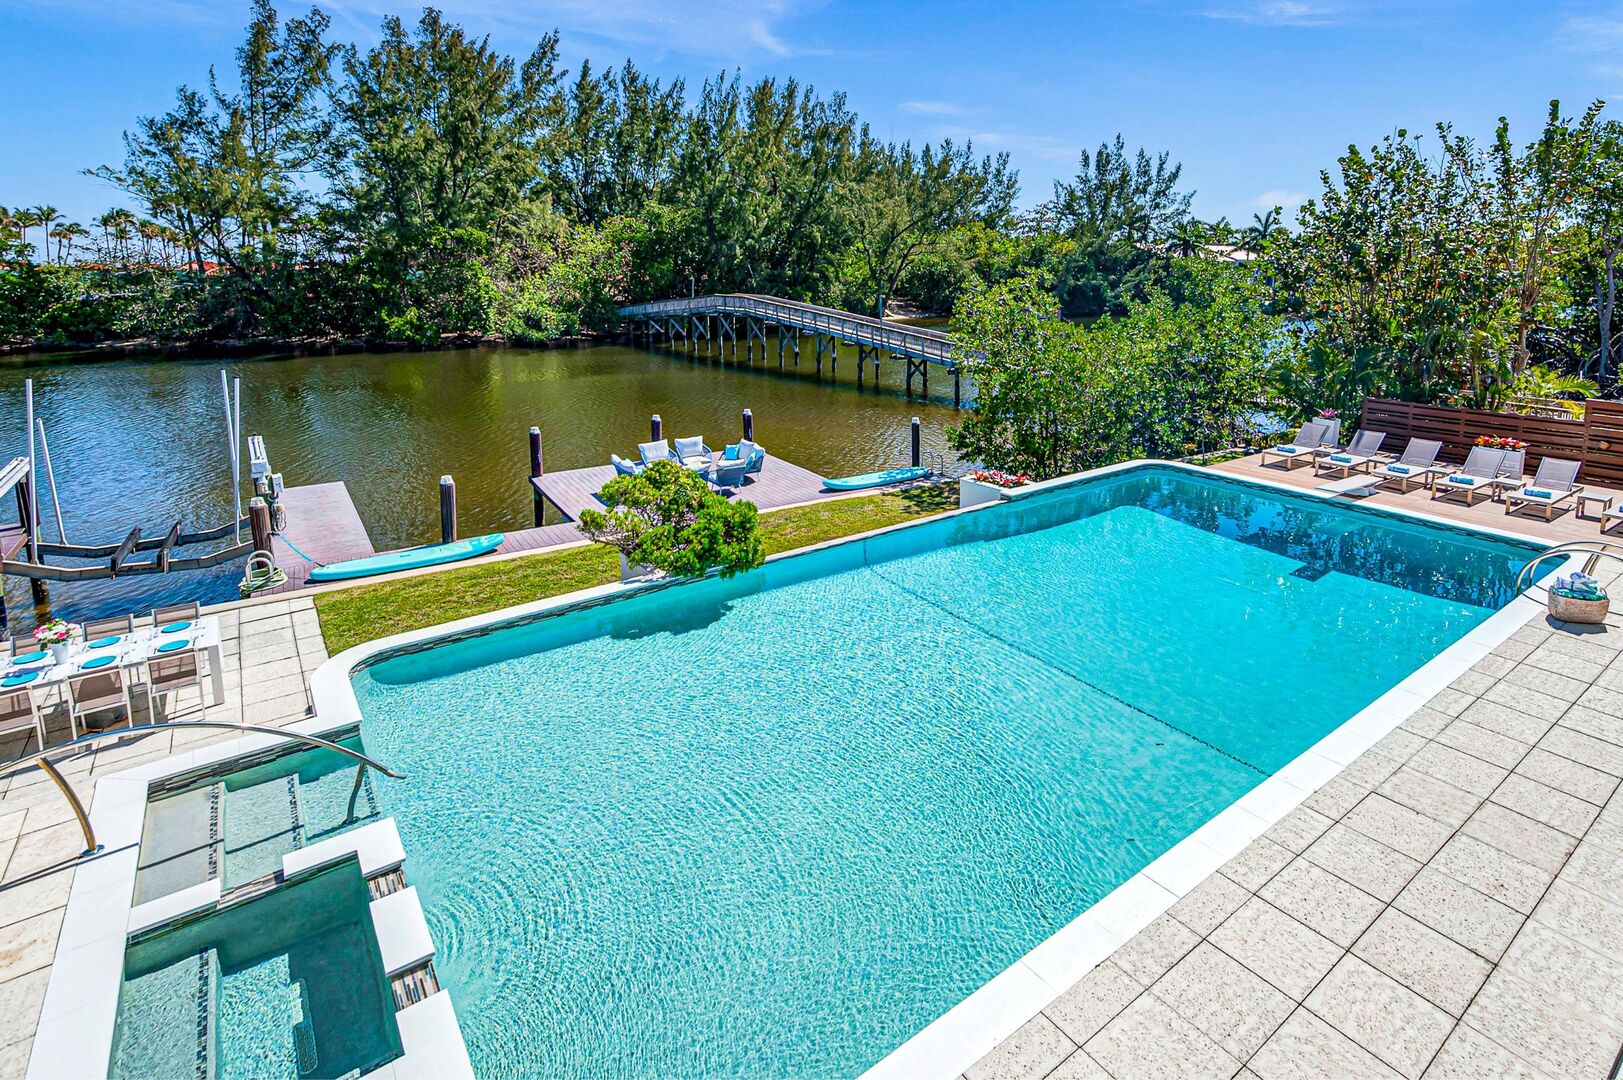 Relish in the tranquility of the hot tub oversized heated pool and waterfront views.